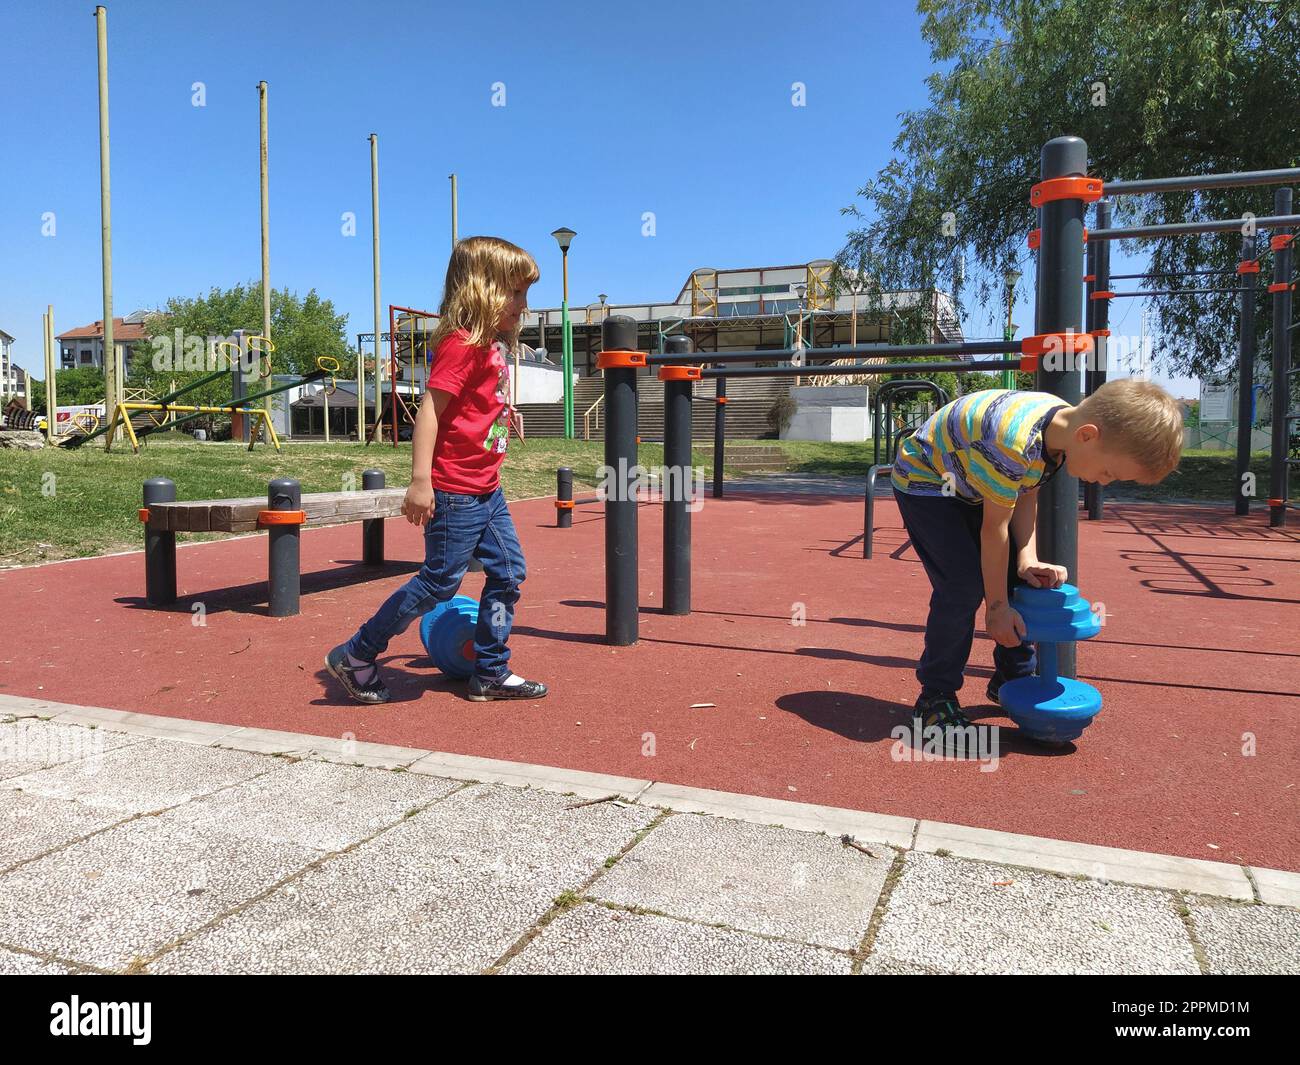 Sremska Mitrovica, Serbia. June 6, 2020. Flip-flops, weight lifting and weights, strength exercises. Two teenagers go in for sports on simulators, children on a sports ground Stock Photo